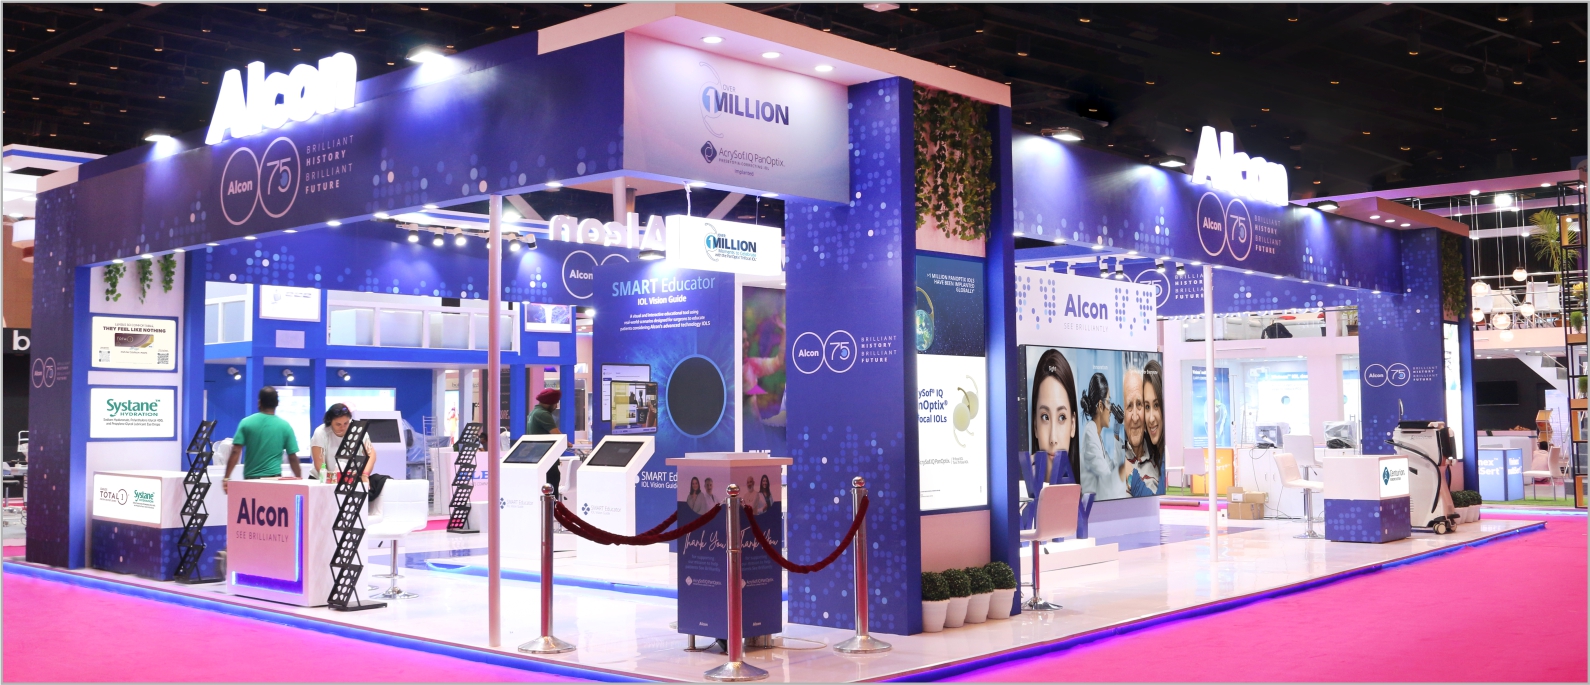 Going Green With Exhibition Booth Design